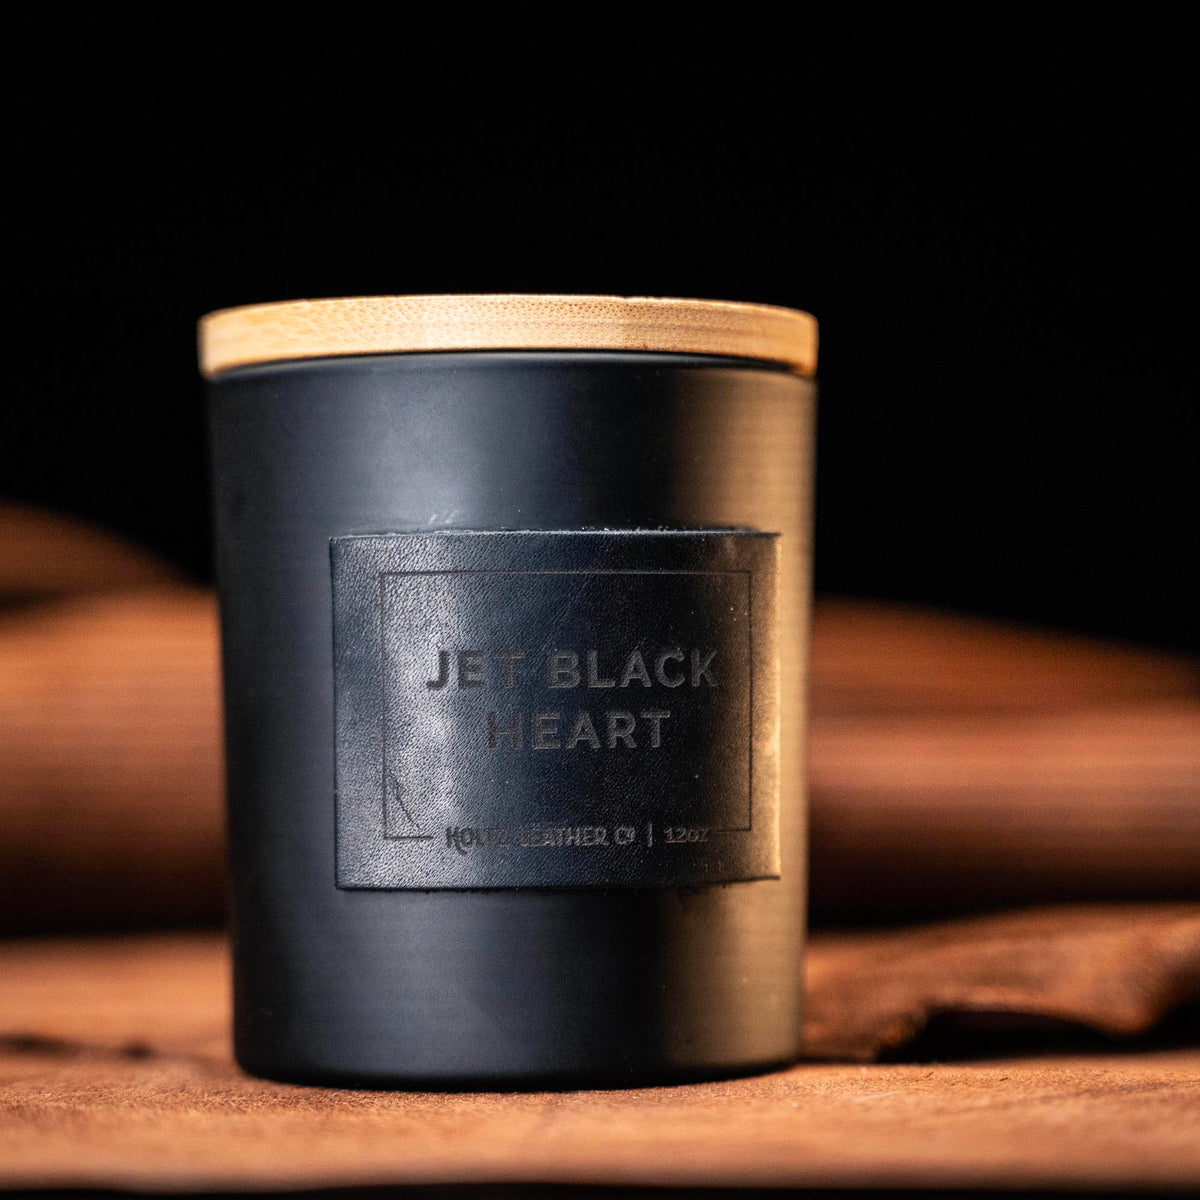 Jet Black Heart - Smolder Luxe Masculine Scented Leather Patch Candle